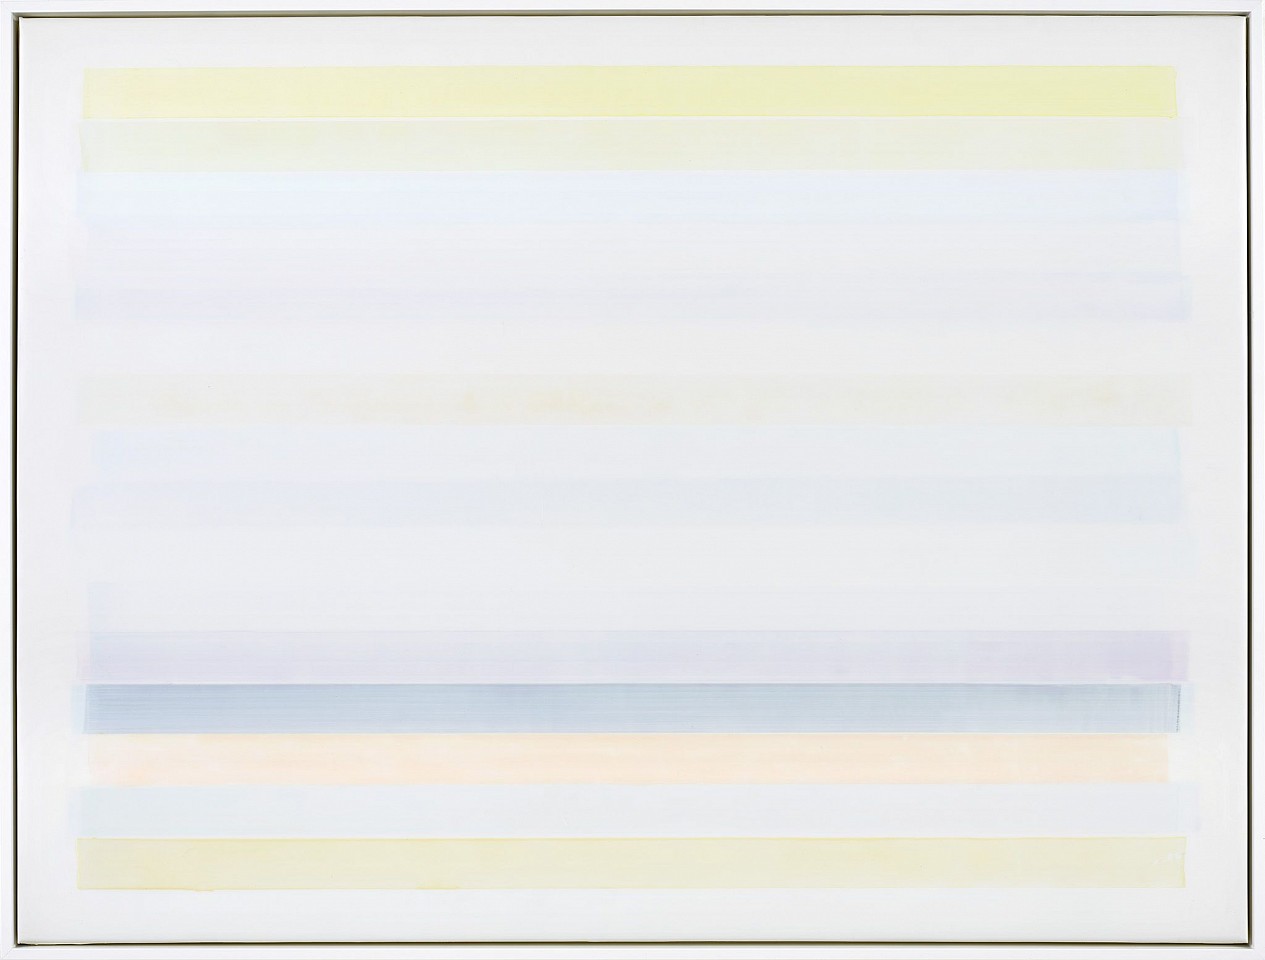 Mike Solomon, Native Shore #8, 2020
Acrylic on polyester films on panel, 36 x 48 in. (91.4 x 121.9 cm)
MSOL-00099